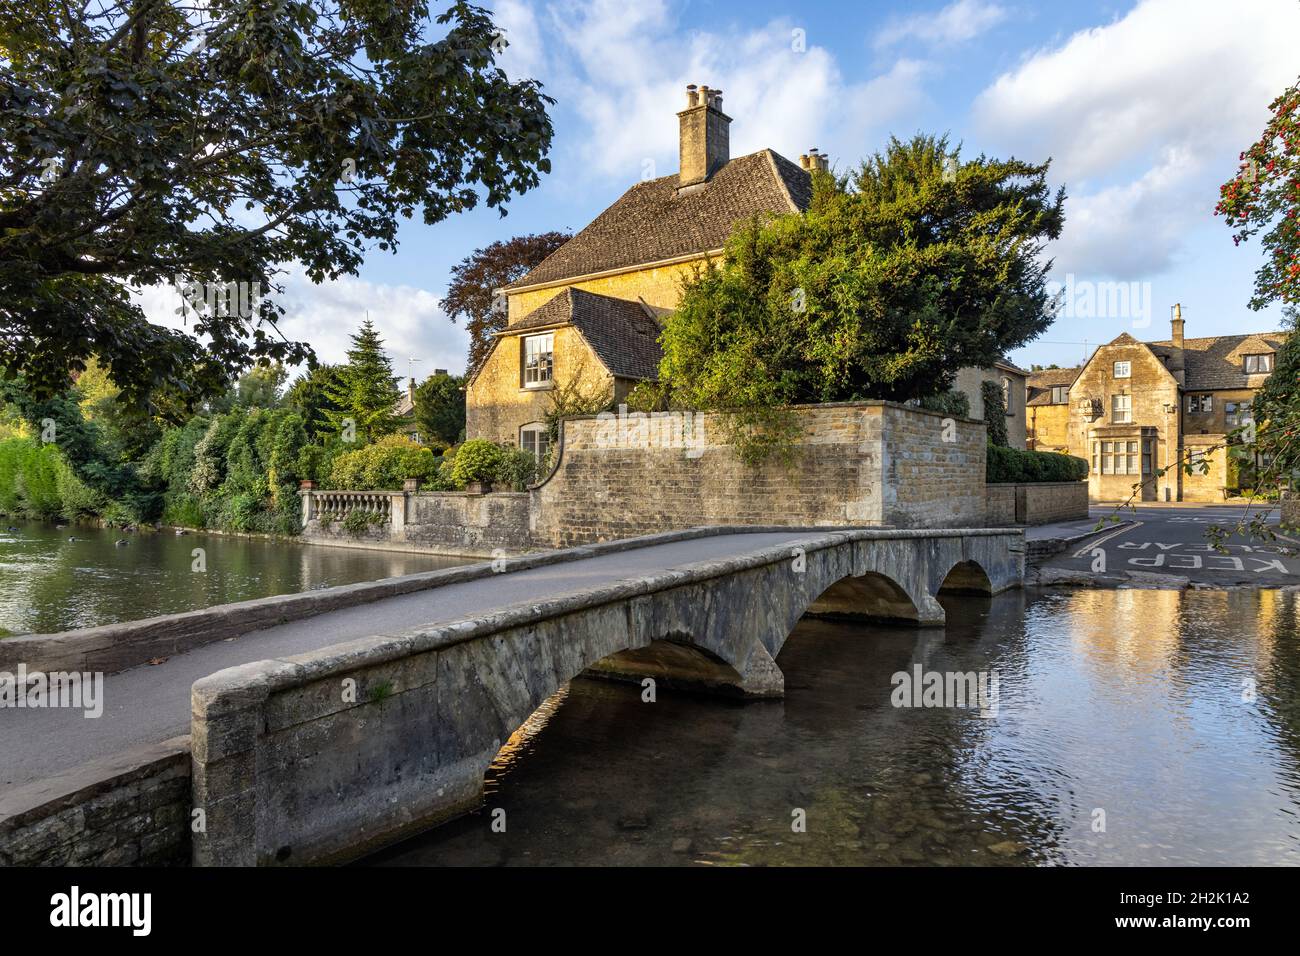 An arched stone bridge crossing the River Windrush in the picturesque Cotswolds Village of Bourton-on-the-Water, Gloucestershire, England. Stock Photo